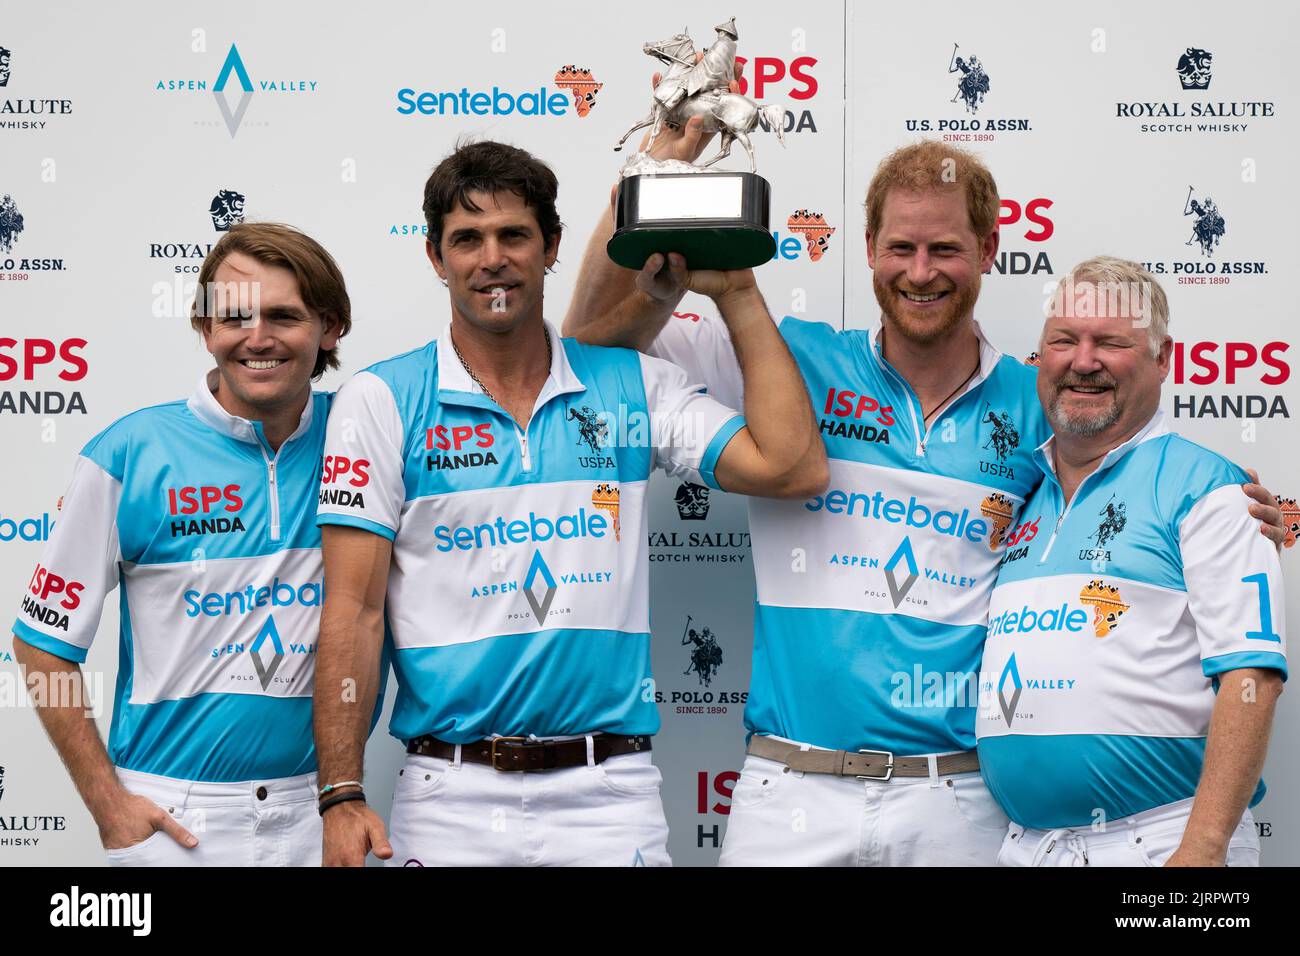 (left to right) Grant Ganzi, Nacho Figueras, the Duke of Sussex and Steve Cox raise the trophy after taking part in a polo match during the Sentebale ISPS Handa Polo Cup at the Aspen Valley Polo Club in Carbondale, Colorado in the United States. Picture date: Thursday August 25, 2022. Stock Photo